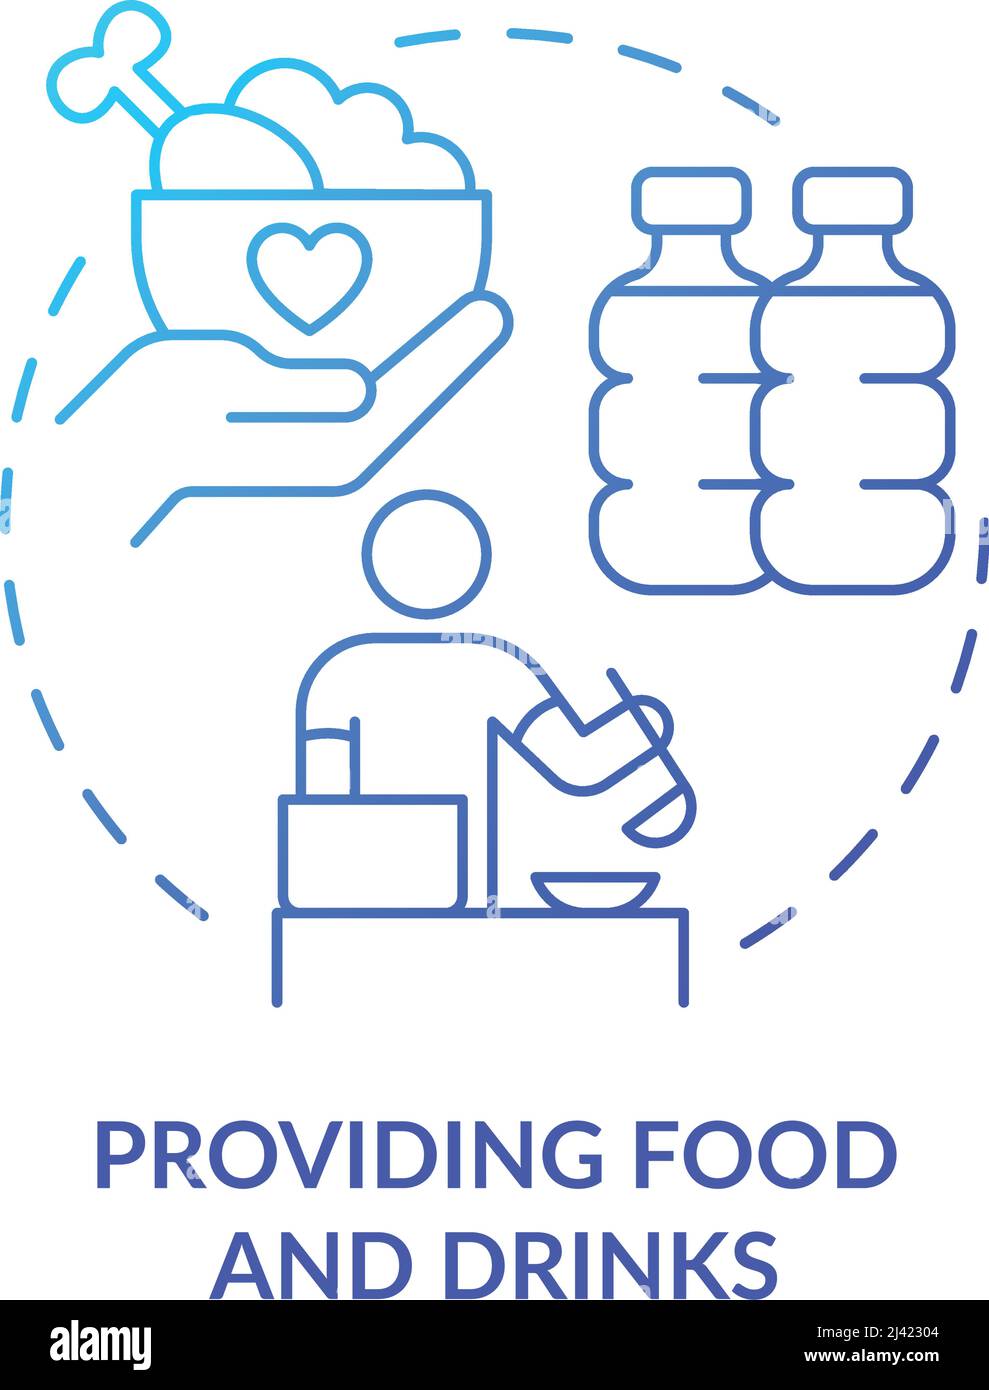 Providing food and drinks blue gradient concept icon Stock Vector